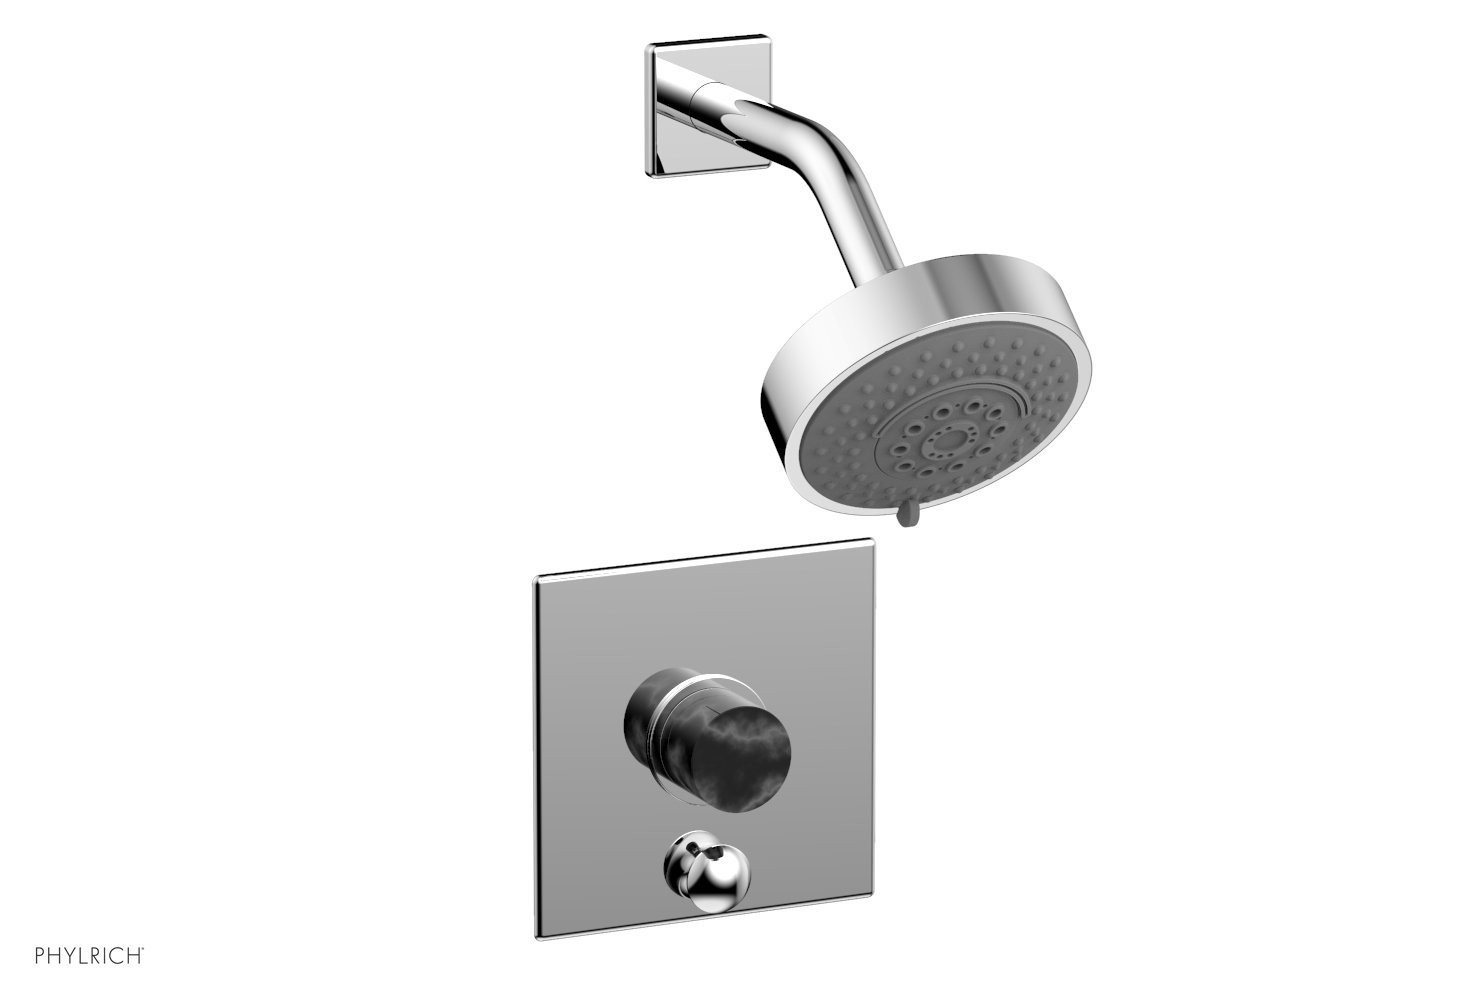 PHYLRICH 4-194-032 BASIC II WALL MOUNT PRESSURE BALANCE SHOWER AND DIVERTER SET WITH SOAP STONE LEVER HANDLE